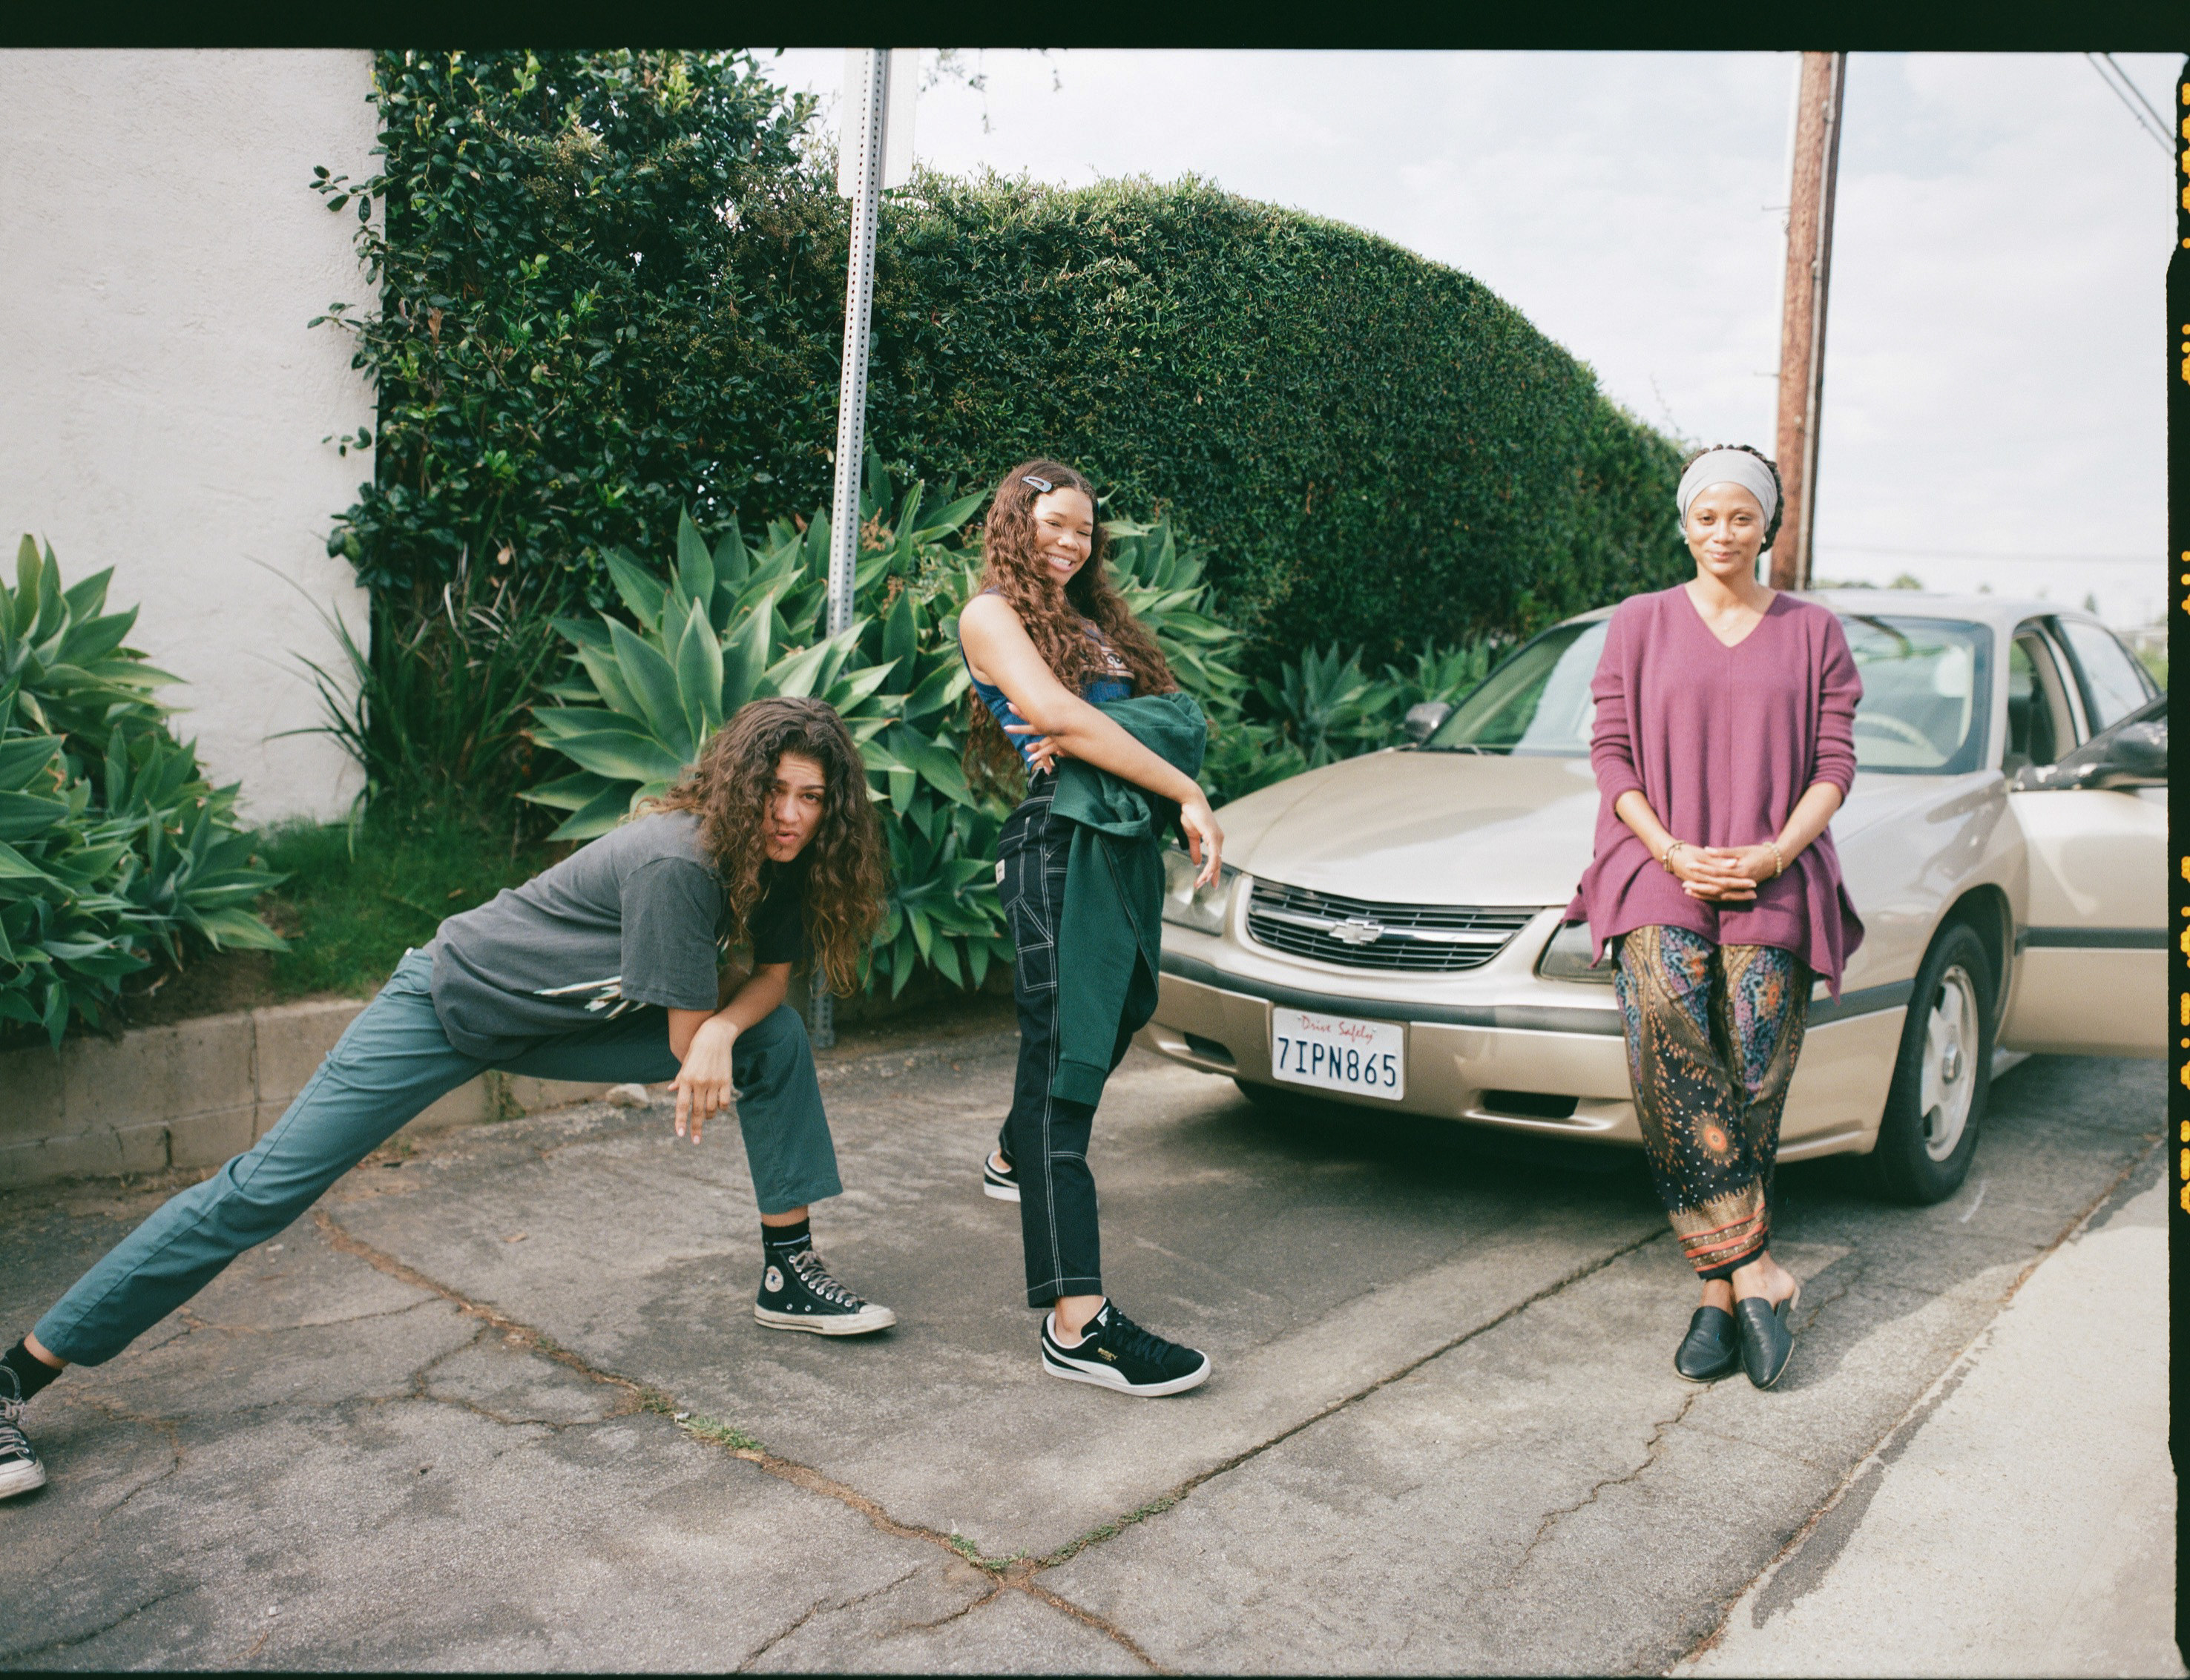 Zendaya, the actresses who play her sister, and their mom in front of their car on set